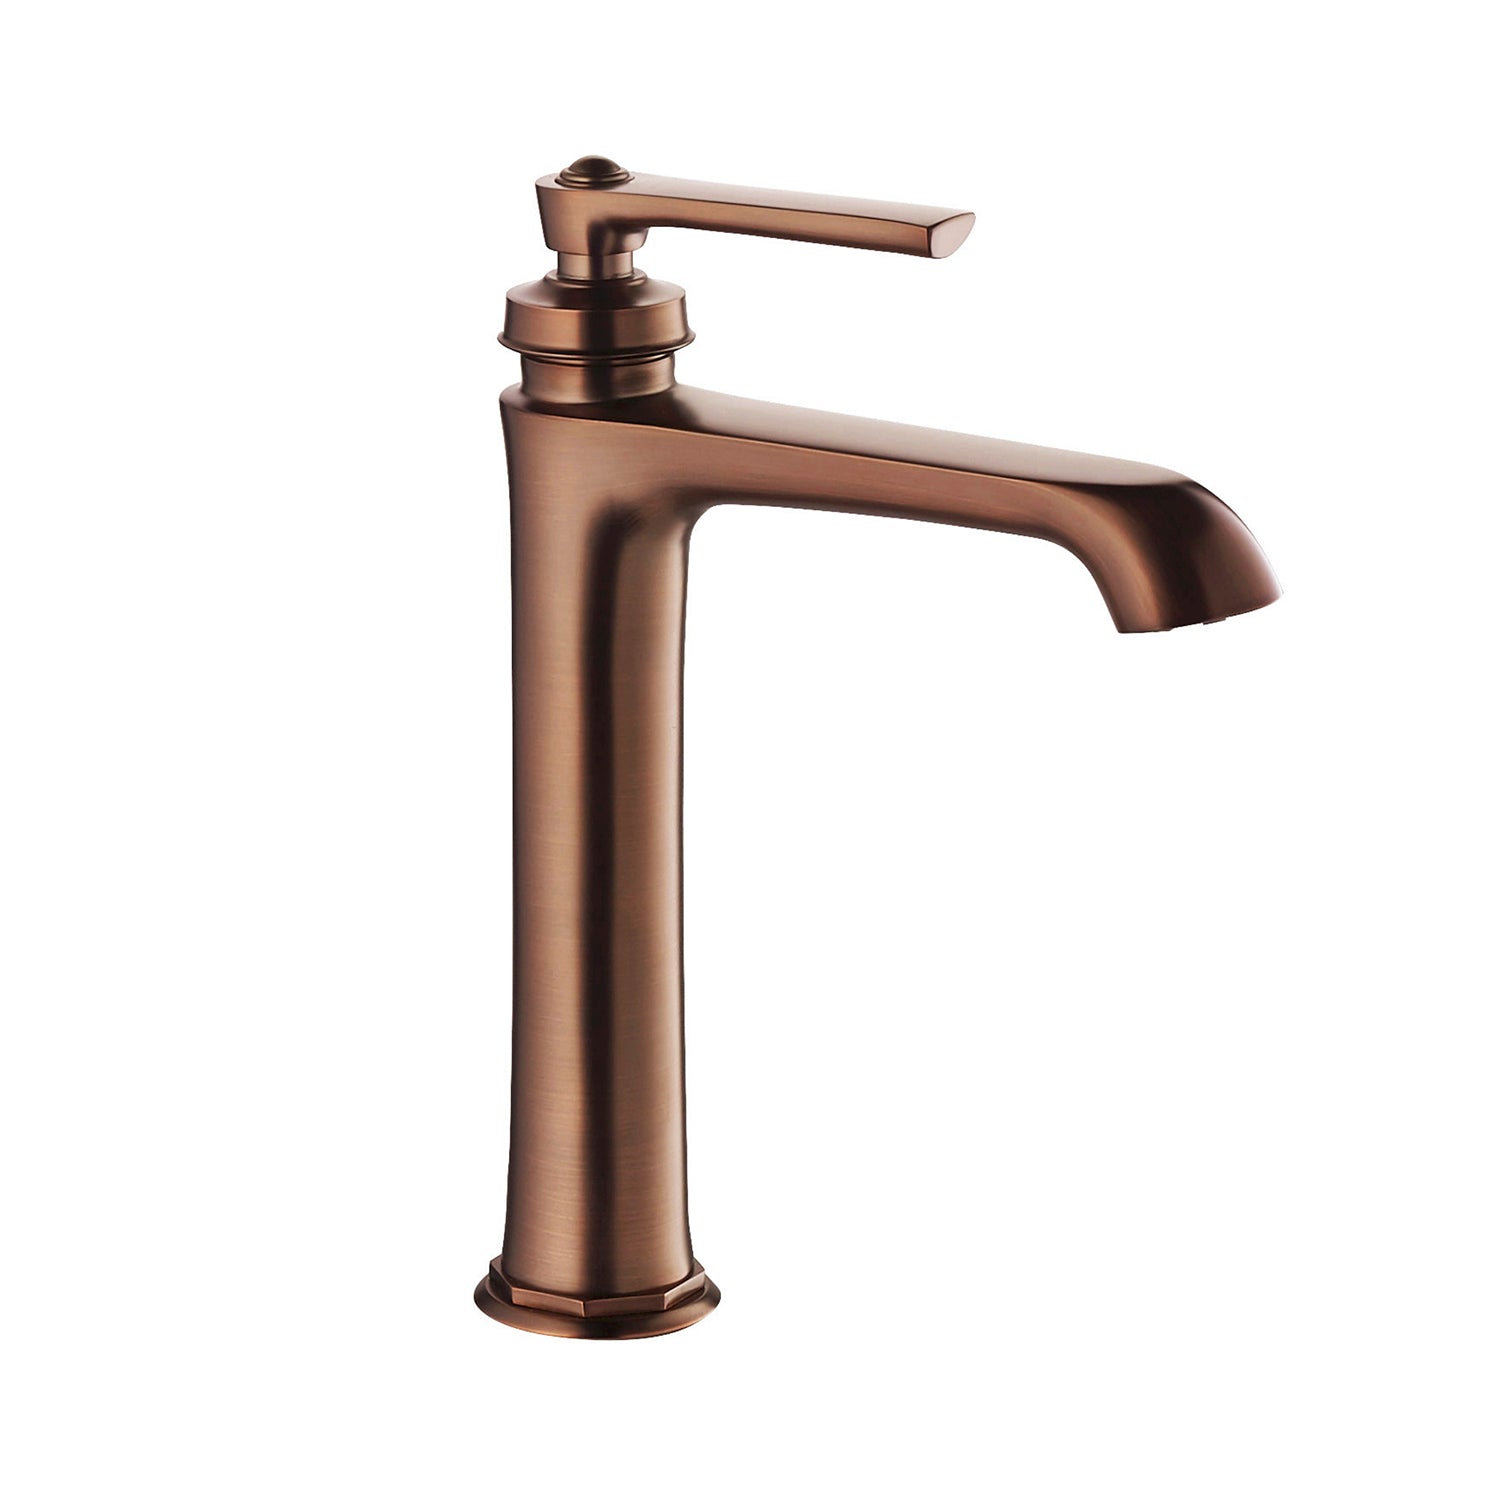 DAX Single Handle Bathroom Vessel Sink Faucet, Brass Body, Oil Rubbed Bronze Finish, Spout Height 7-1/16 Inches (DAX-9809A-ORB)